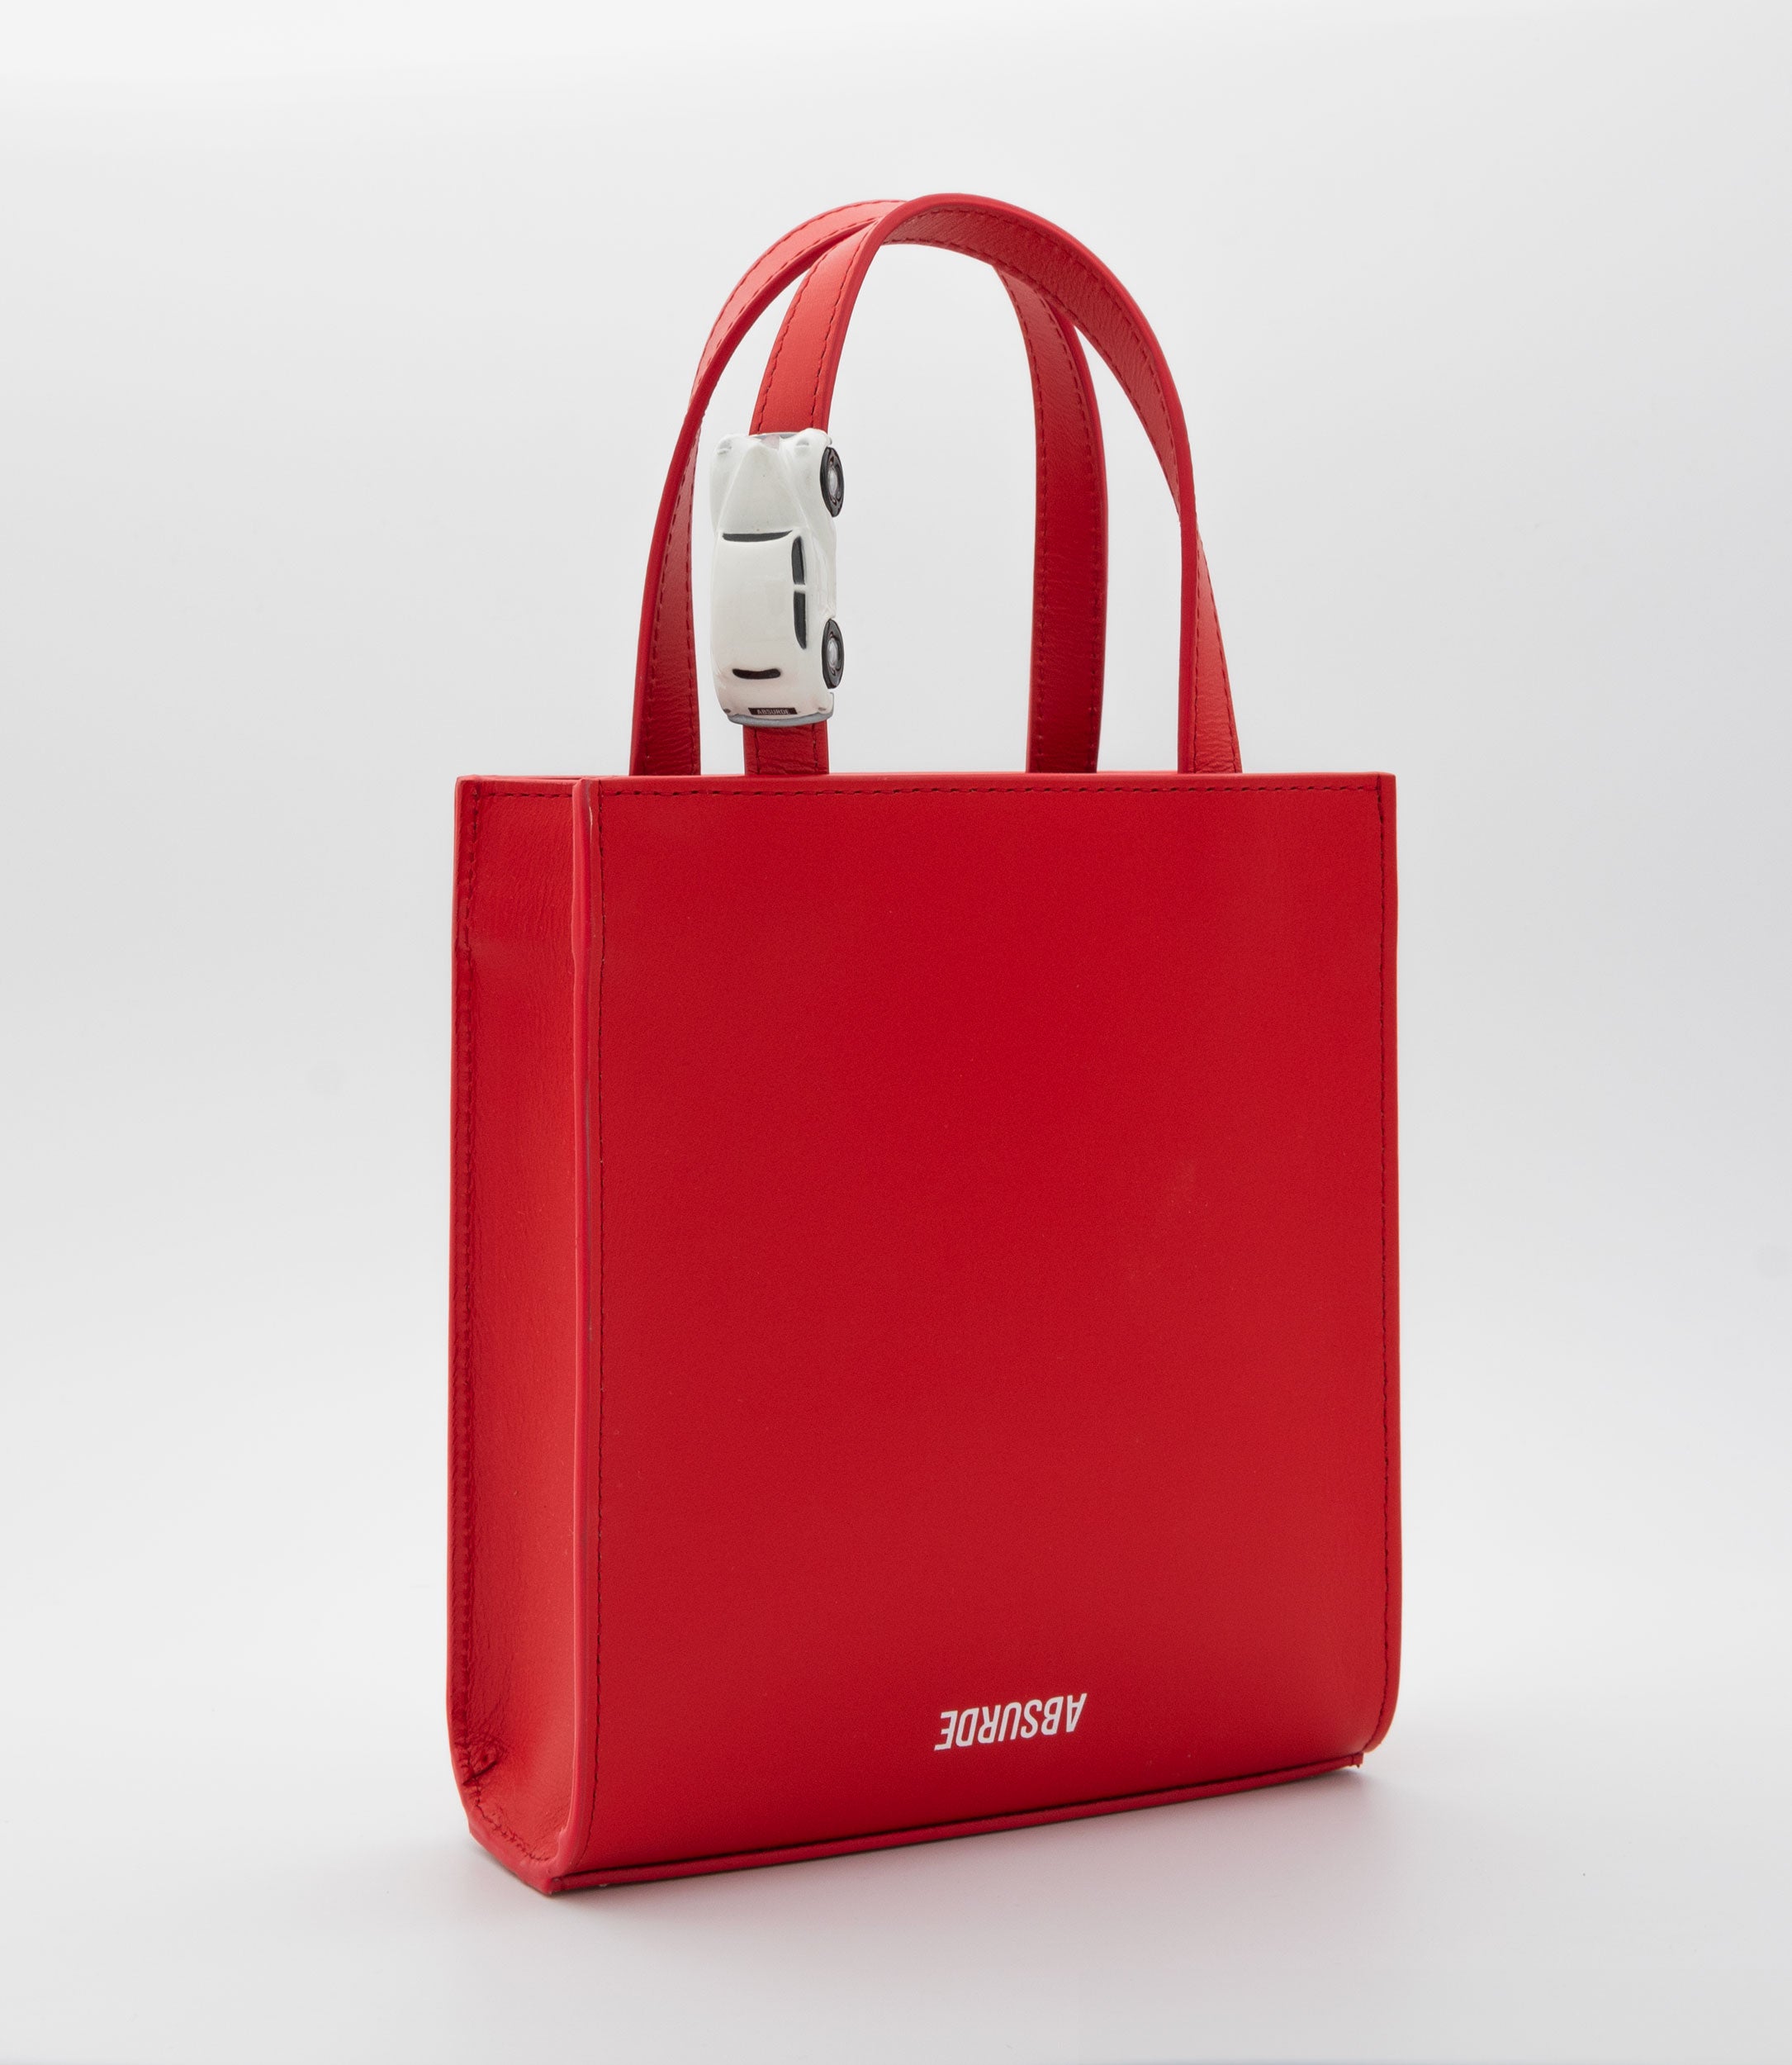 STOP Mini Tote Bag in Red Leather